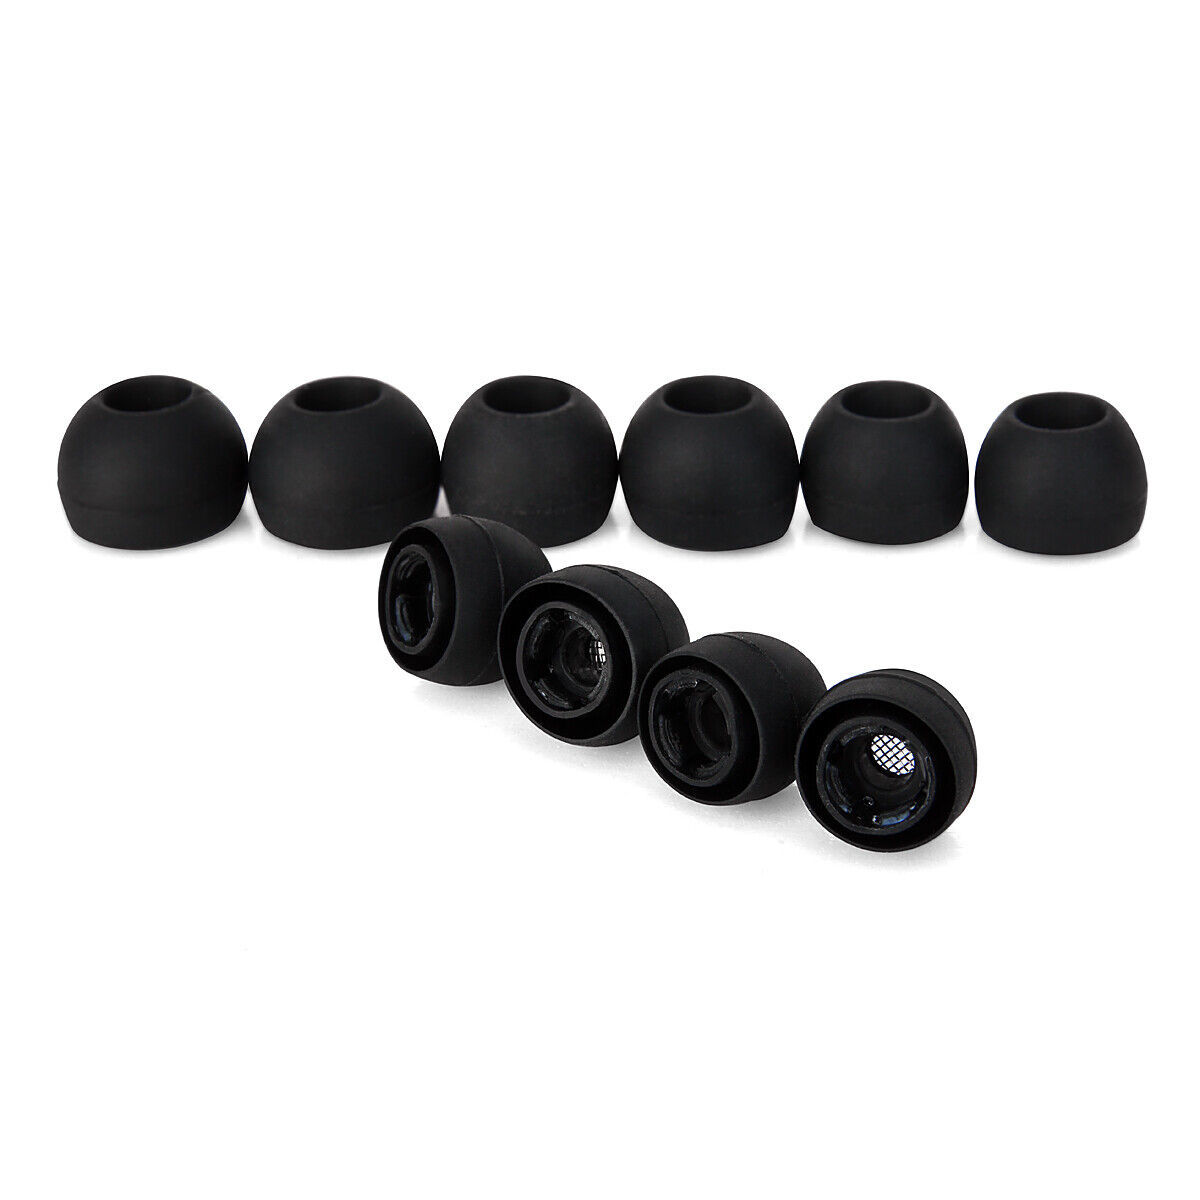 Replacement 5 pairs Earbuds Tips For Sennheiser IE800 IE 800 IE800S - $11.87